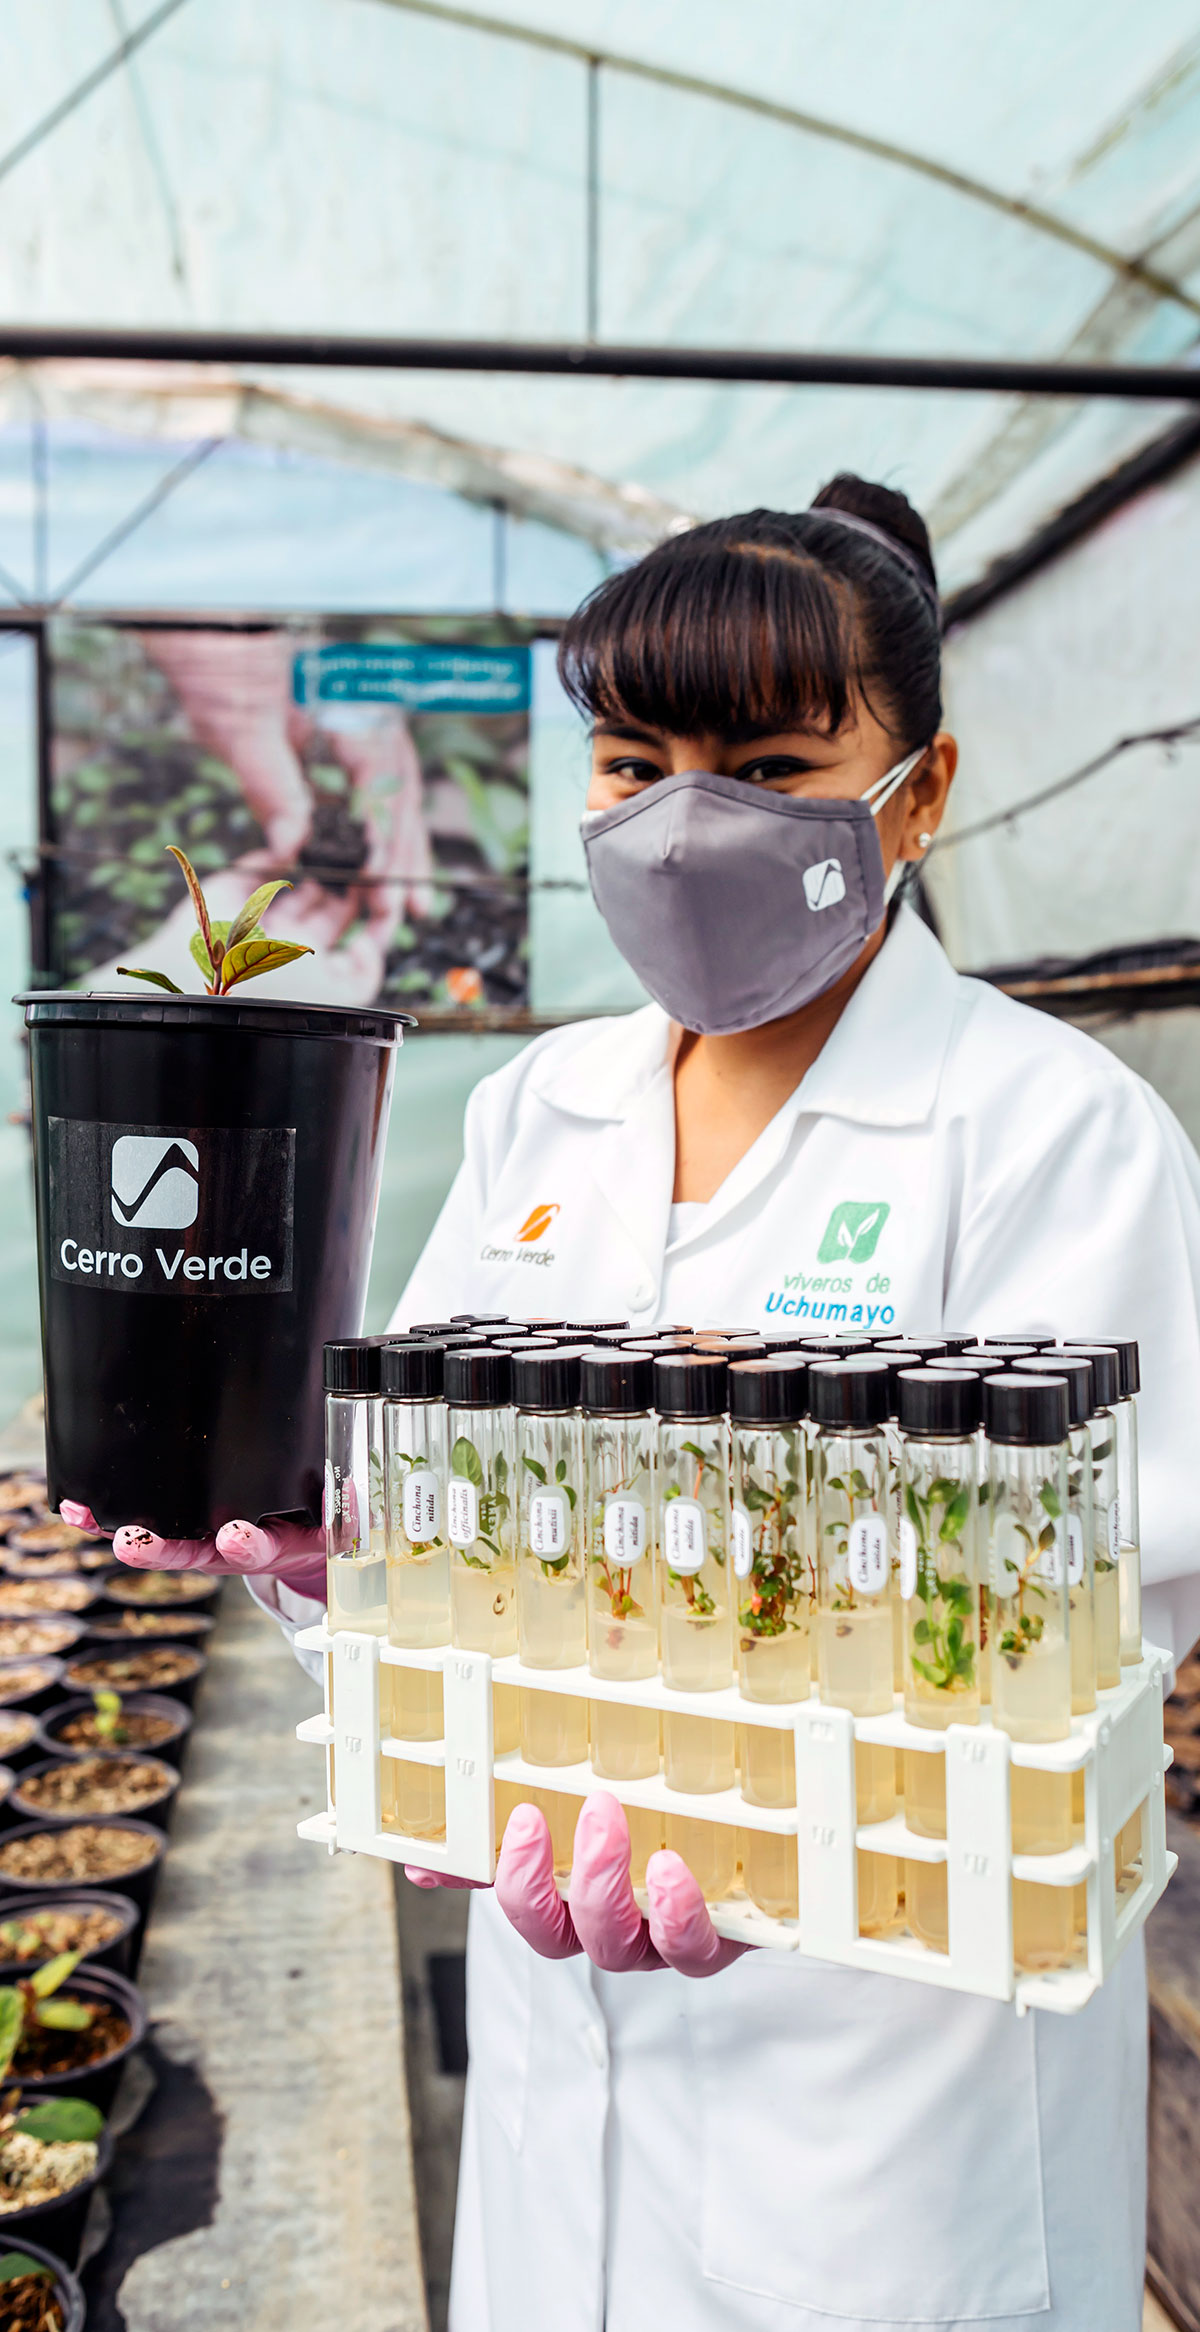 Cerro Verde maintains a native plant nursery near our operations in Peru.